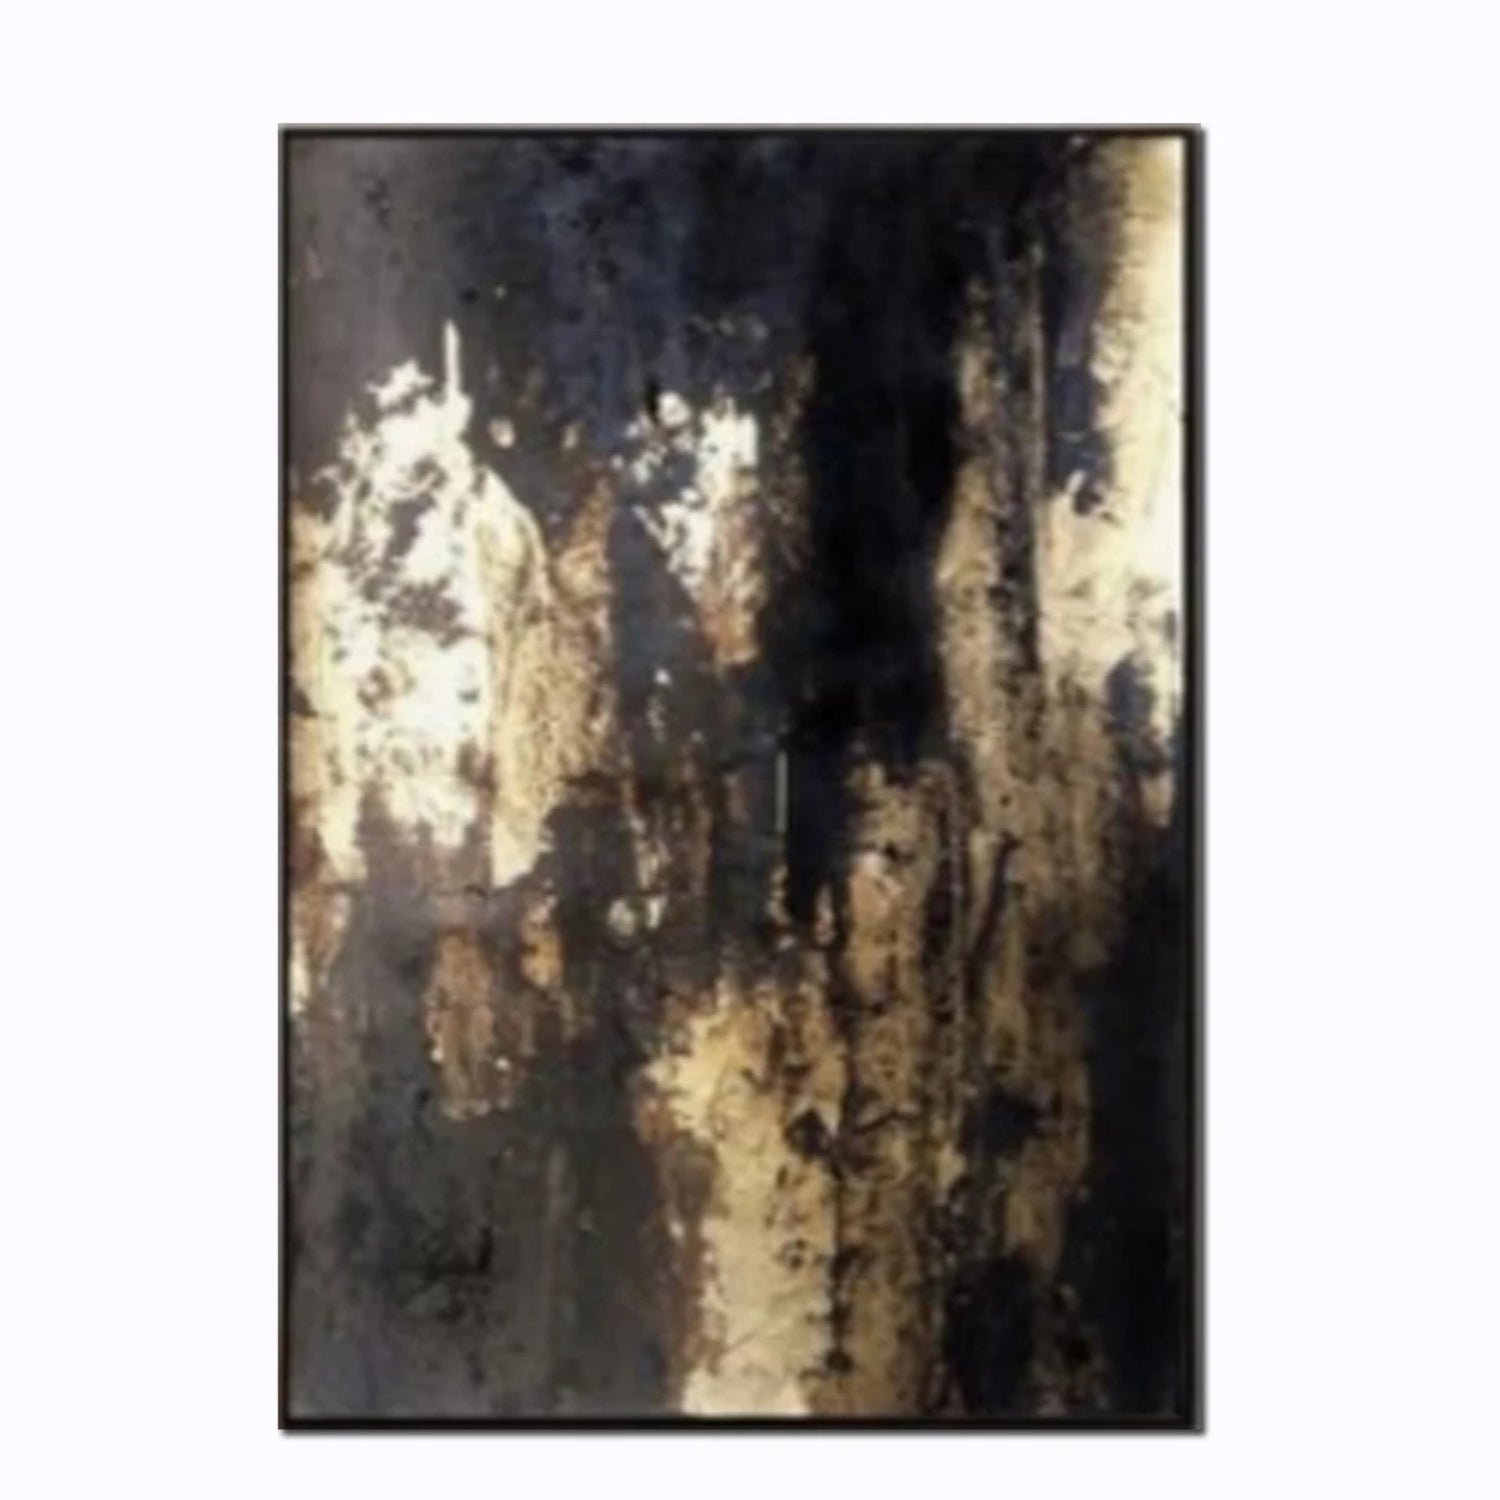 Vertical Black Gold Foil Abstract Expressionism Wall Painting